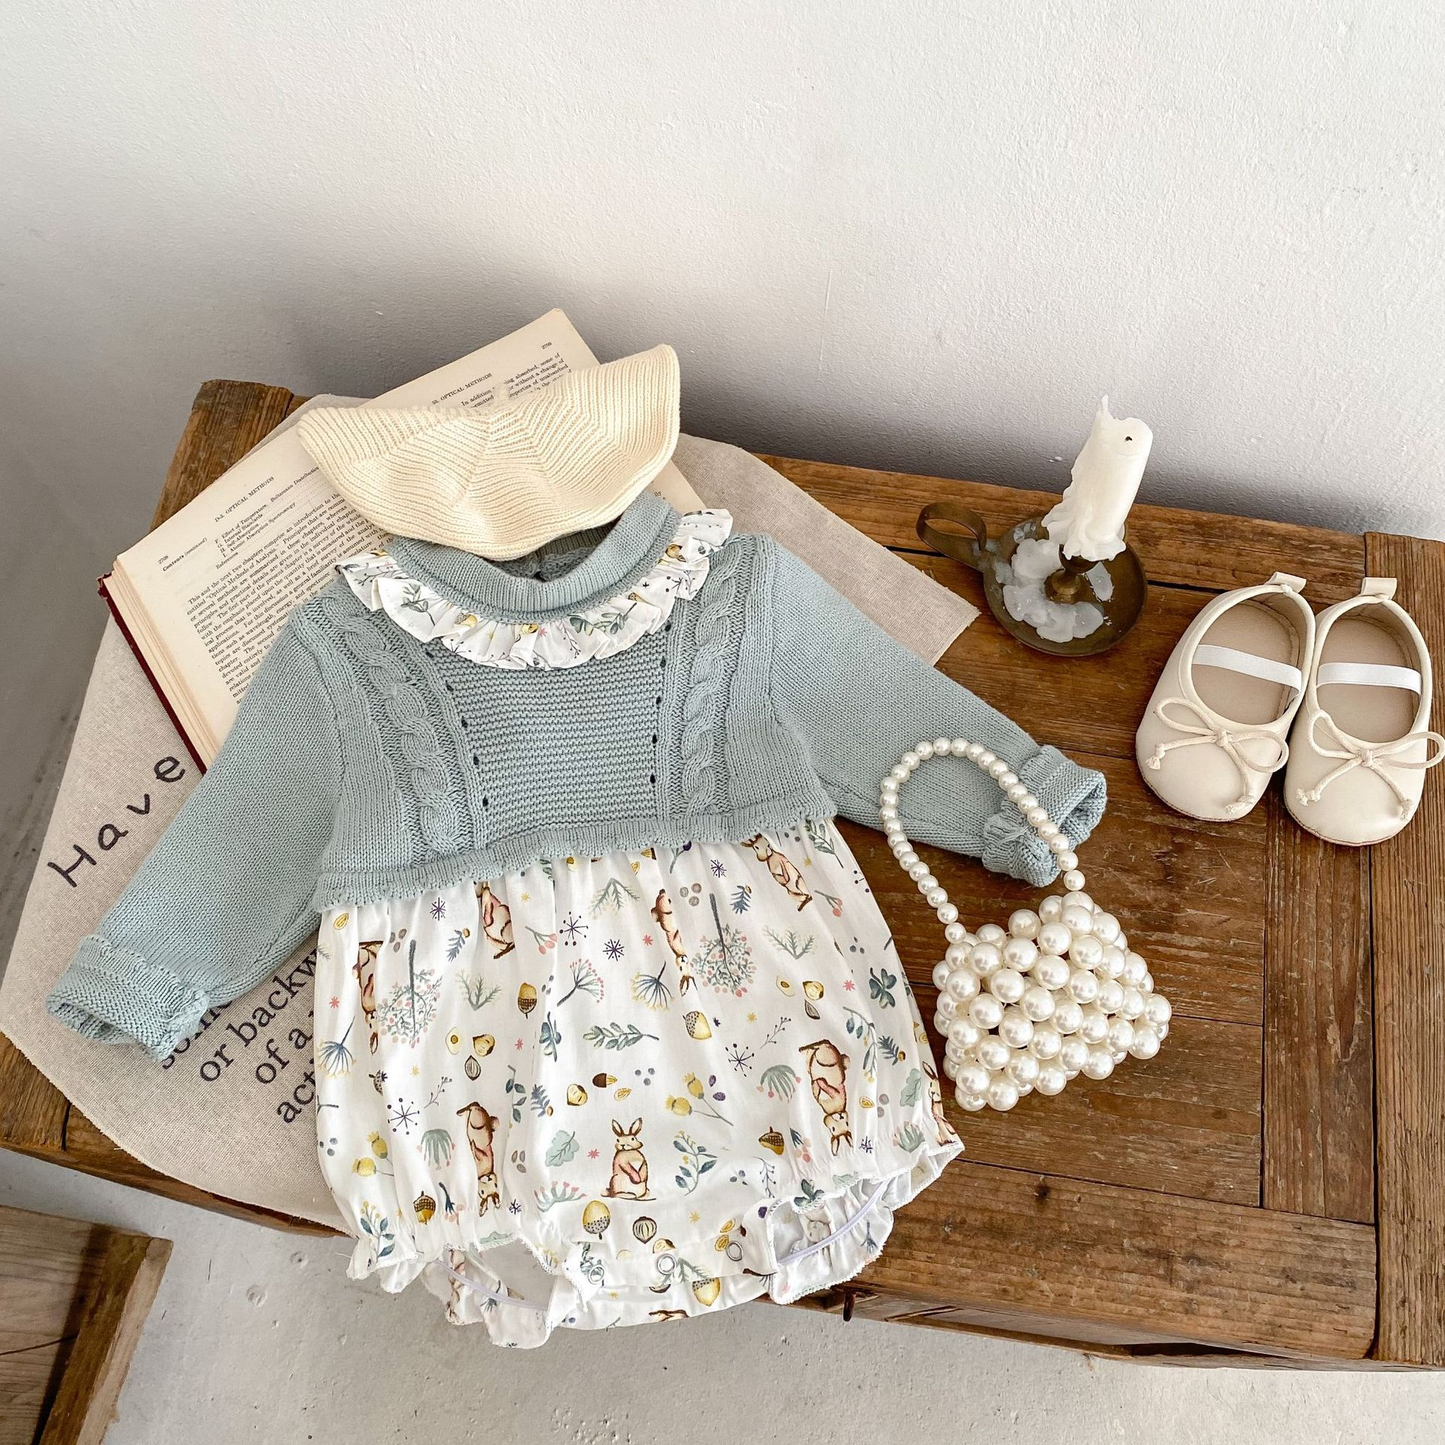 Annie & Charles® Baby Bloomer/FOREST LIFE dress